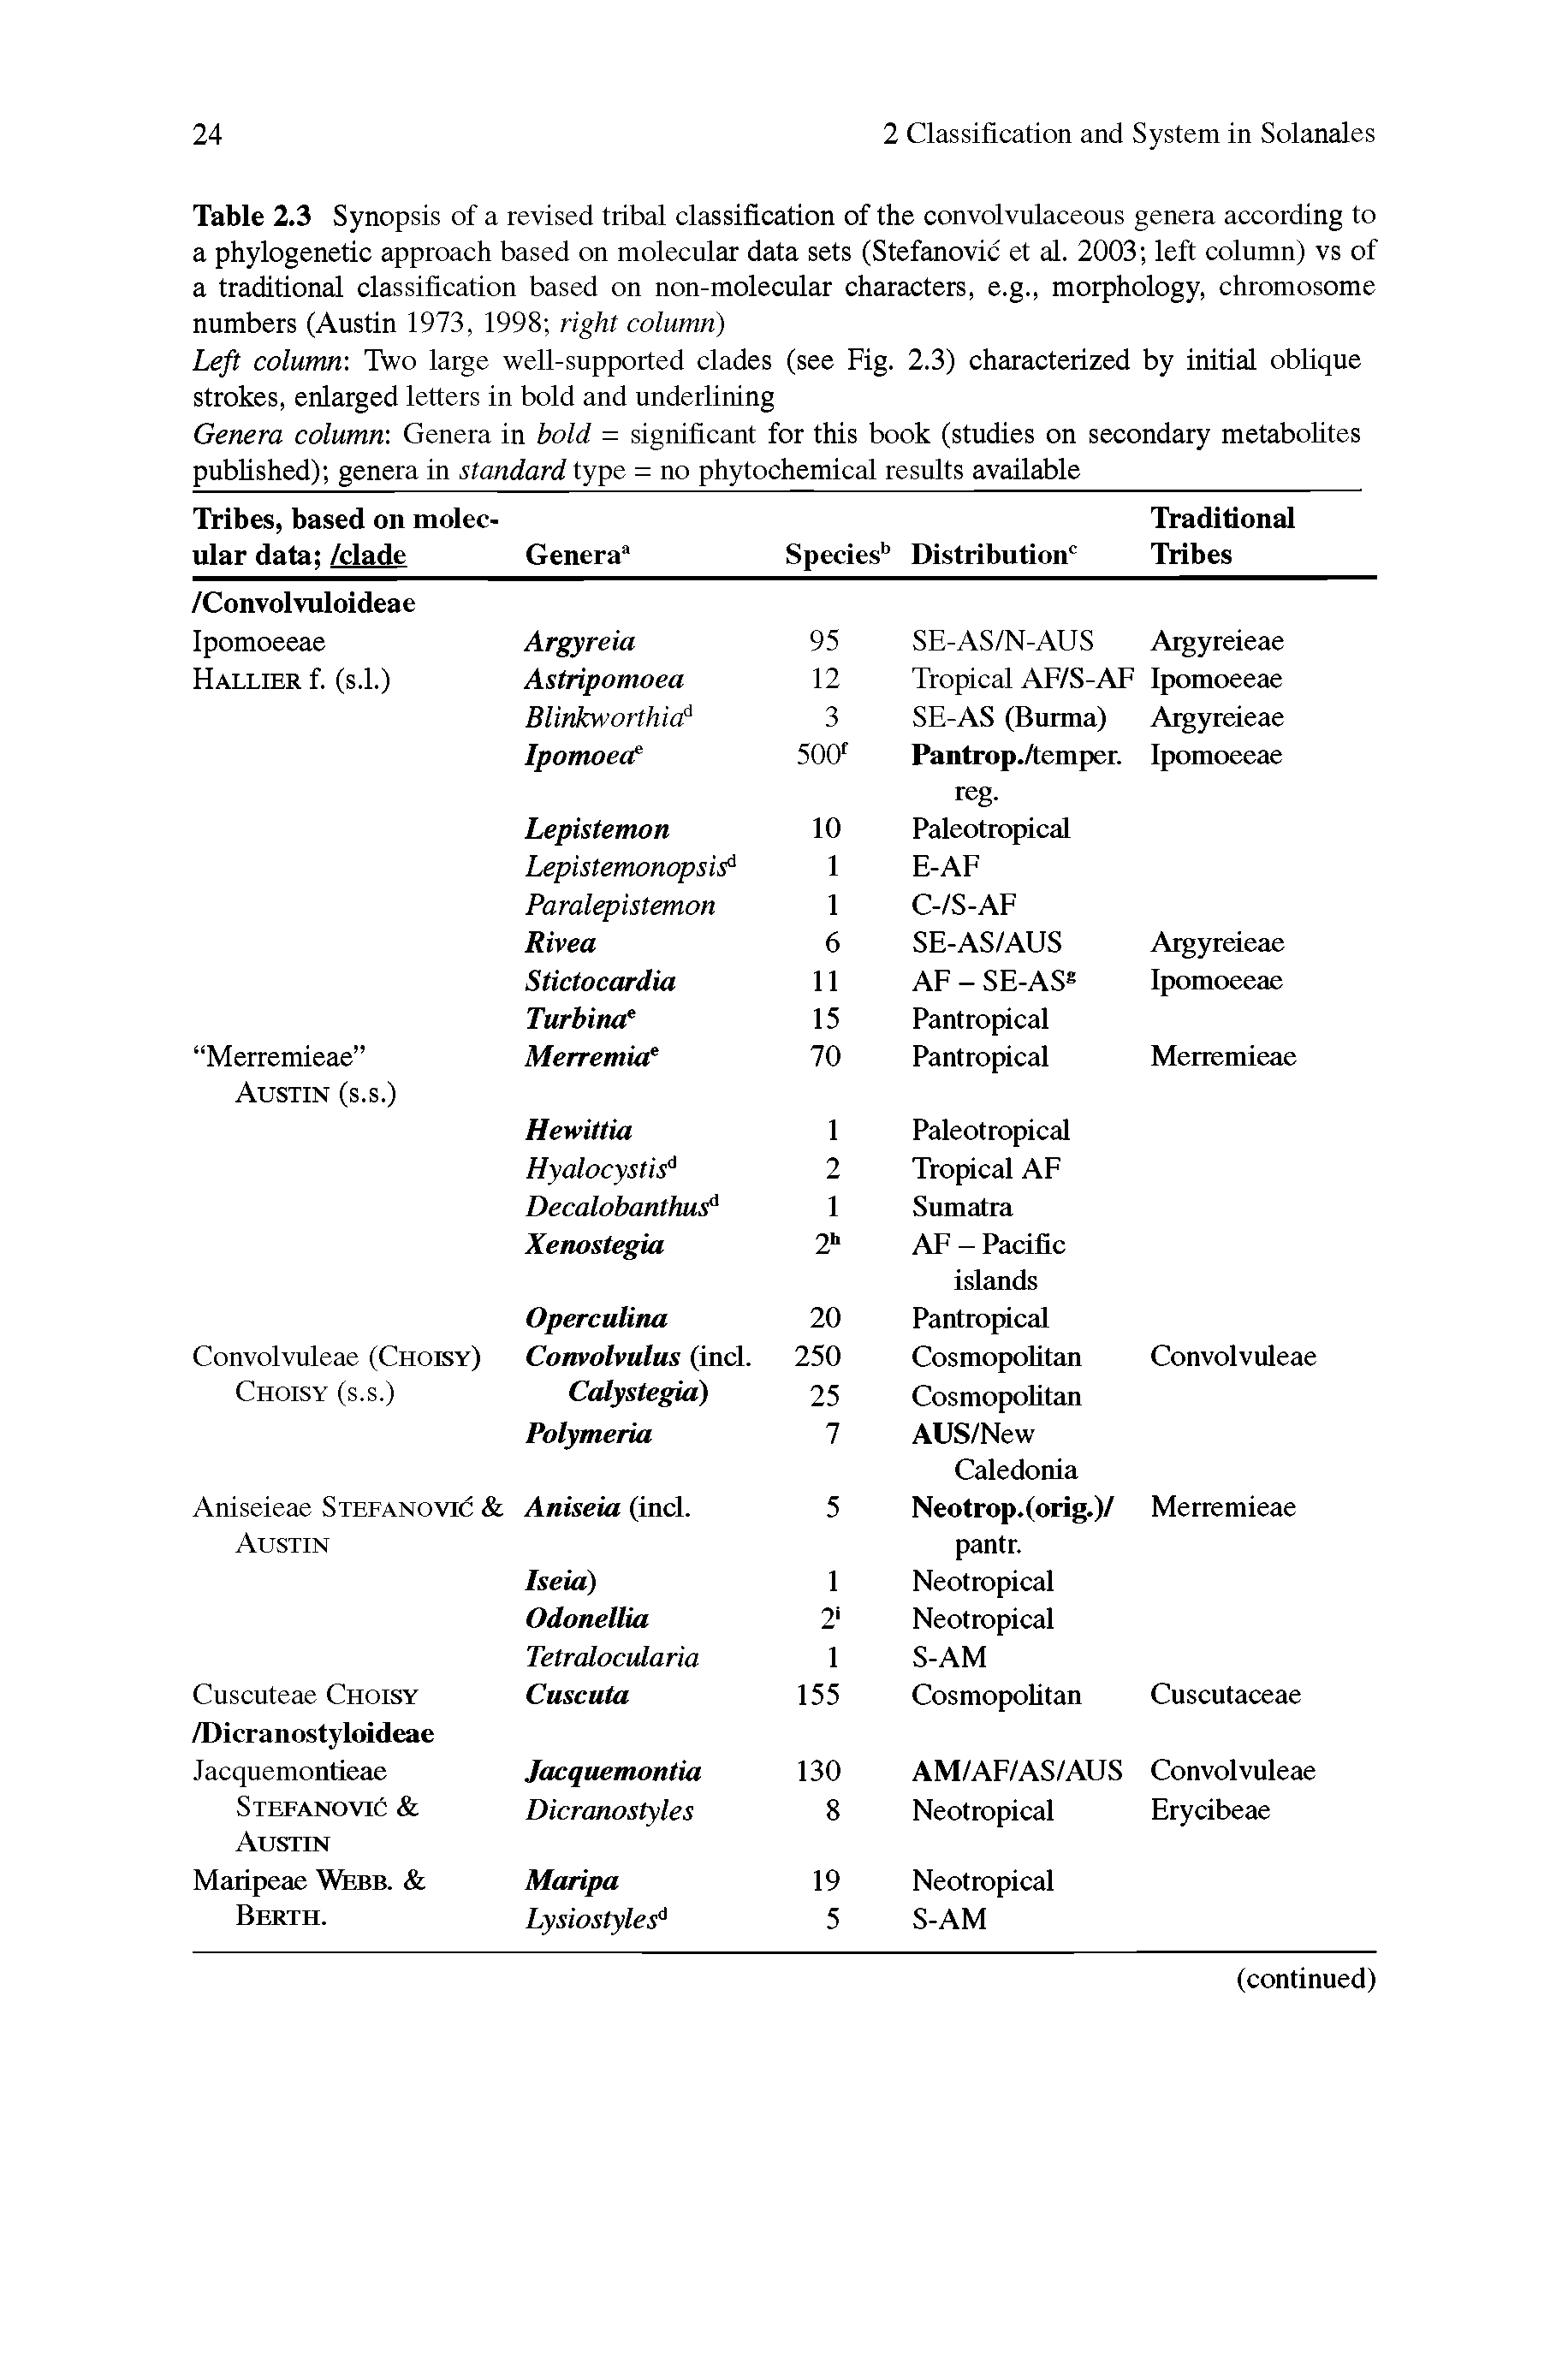 Table 2.3 Synopsis of a revised tribal classification of the convolvulaceous genera according to a phylogenetic approach based on molecular data sets (Stefanovic et al. 2003 left column) vs of a traditional classification based on non-molecular characters, e.g., morphology, chromosome numbers (Austin 1973, 1998 right column)...